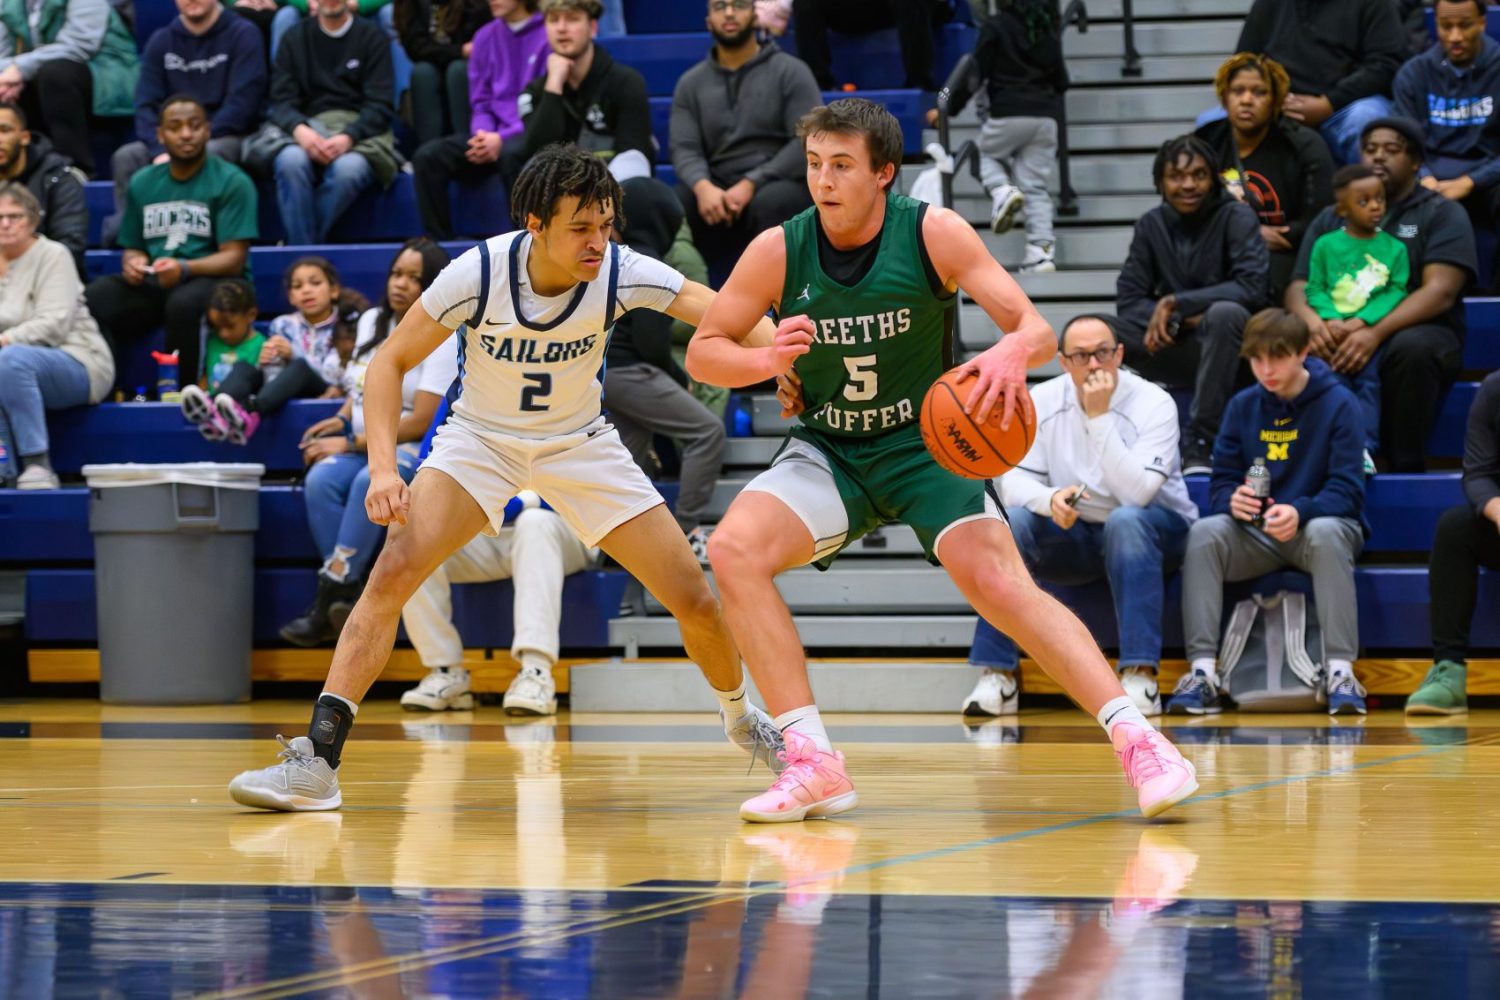 Reeths-Puffer’s 1-2 punch of Whitaker, Ambrose lead Rockets to victory ...